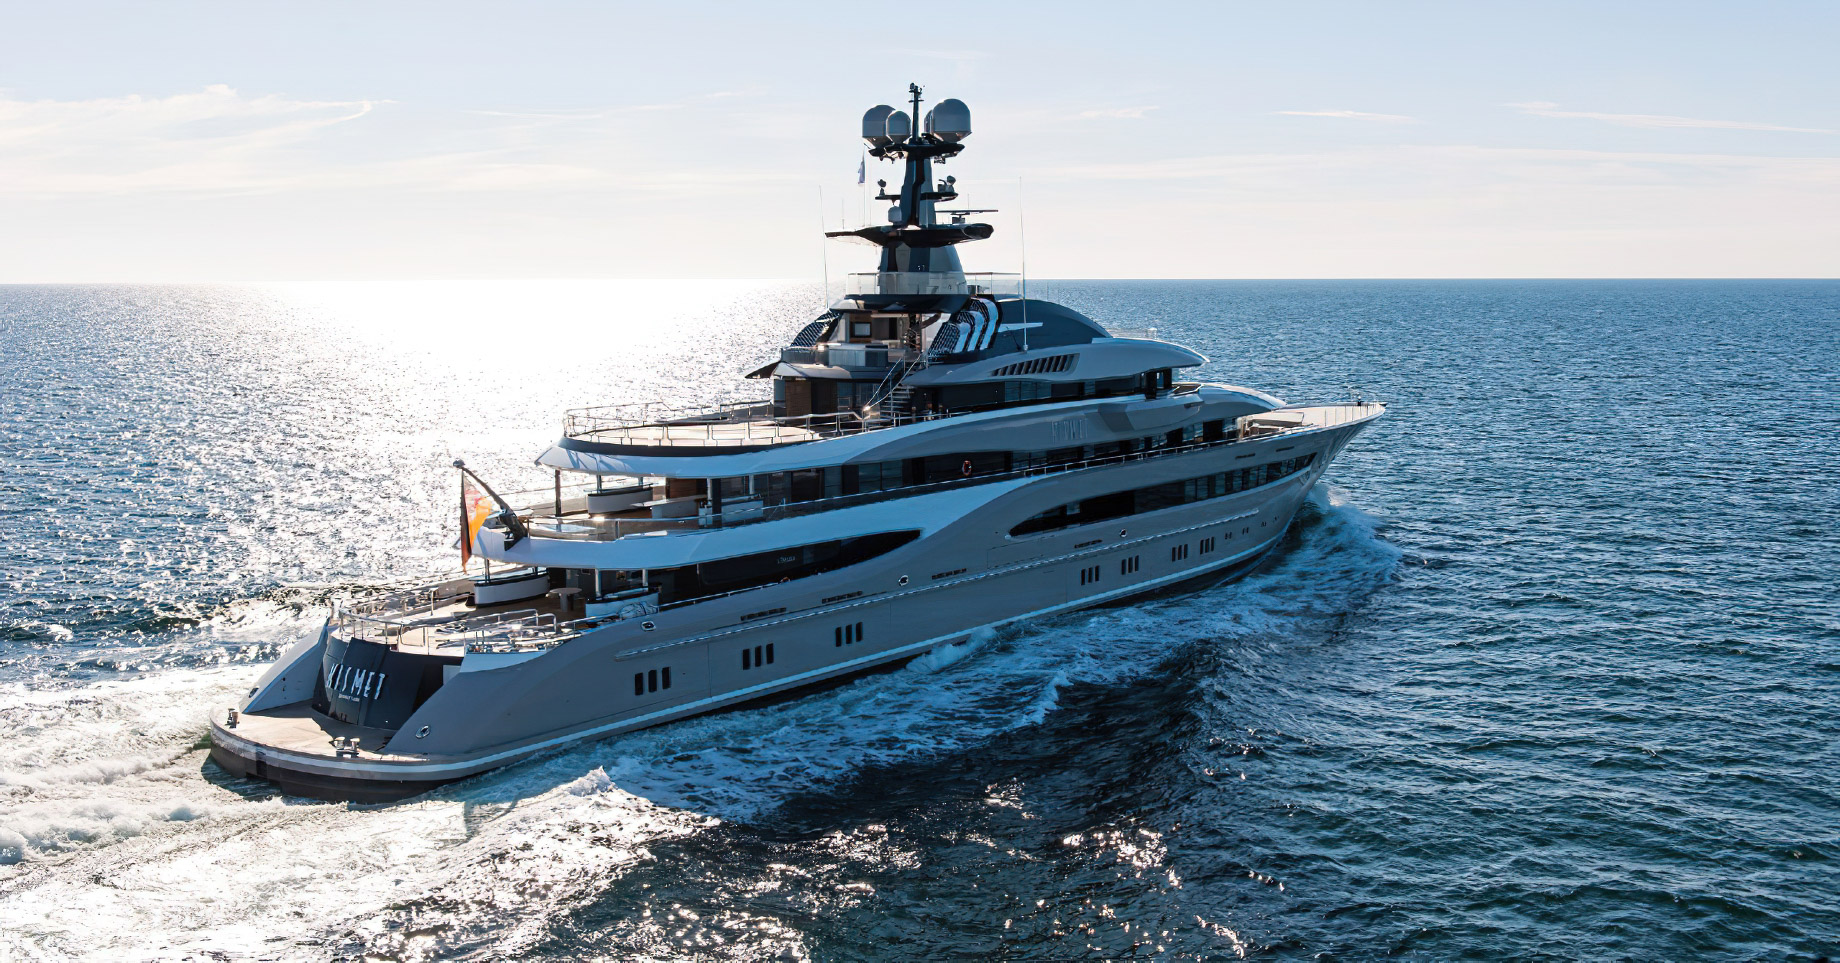 The Best Luxury Yachts For Sale By Amenity - Kismet Yacht